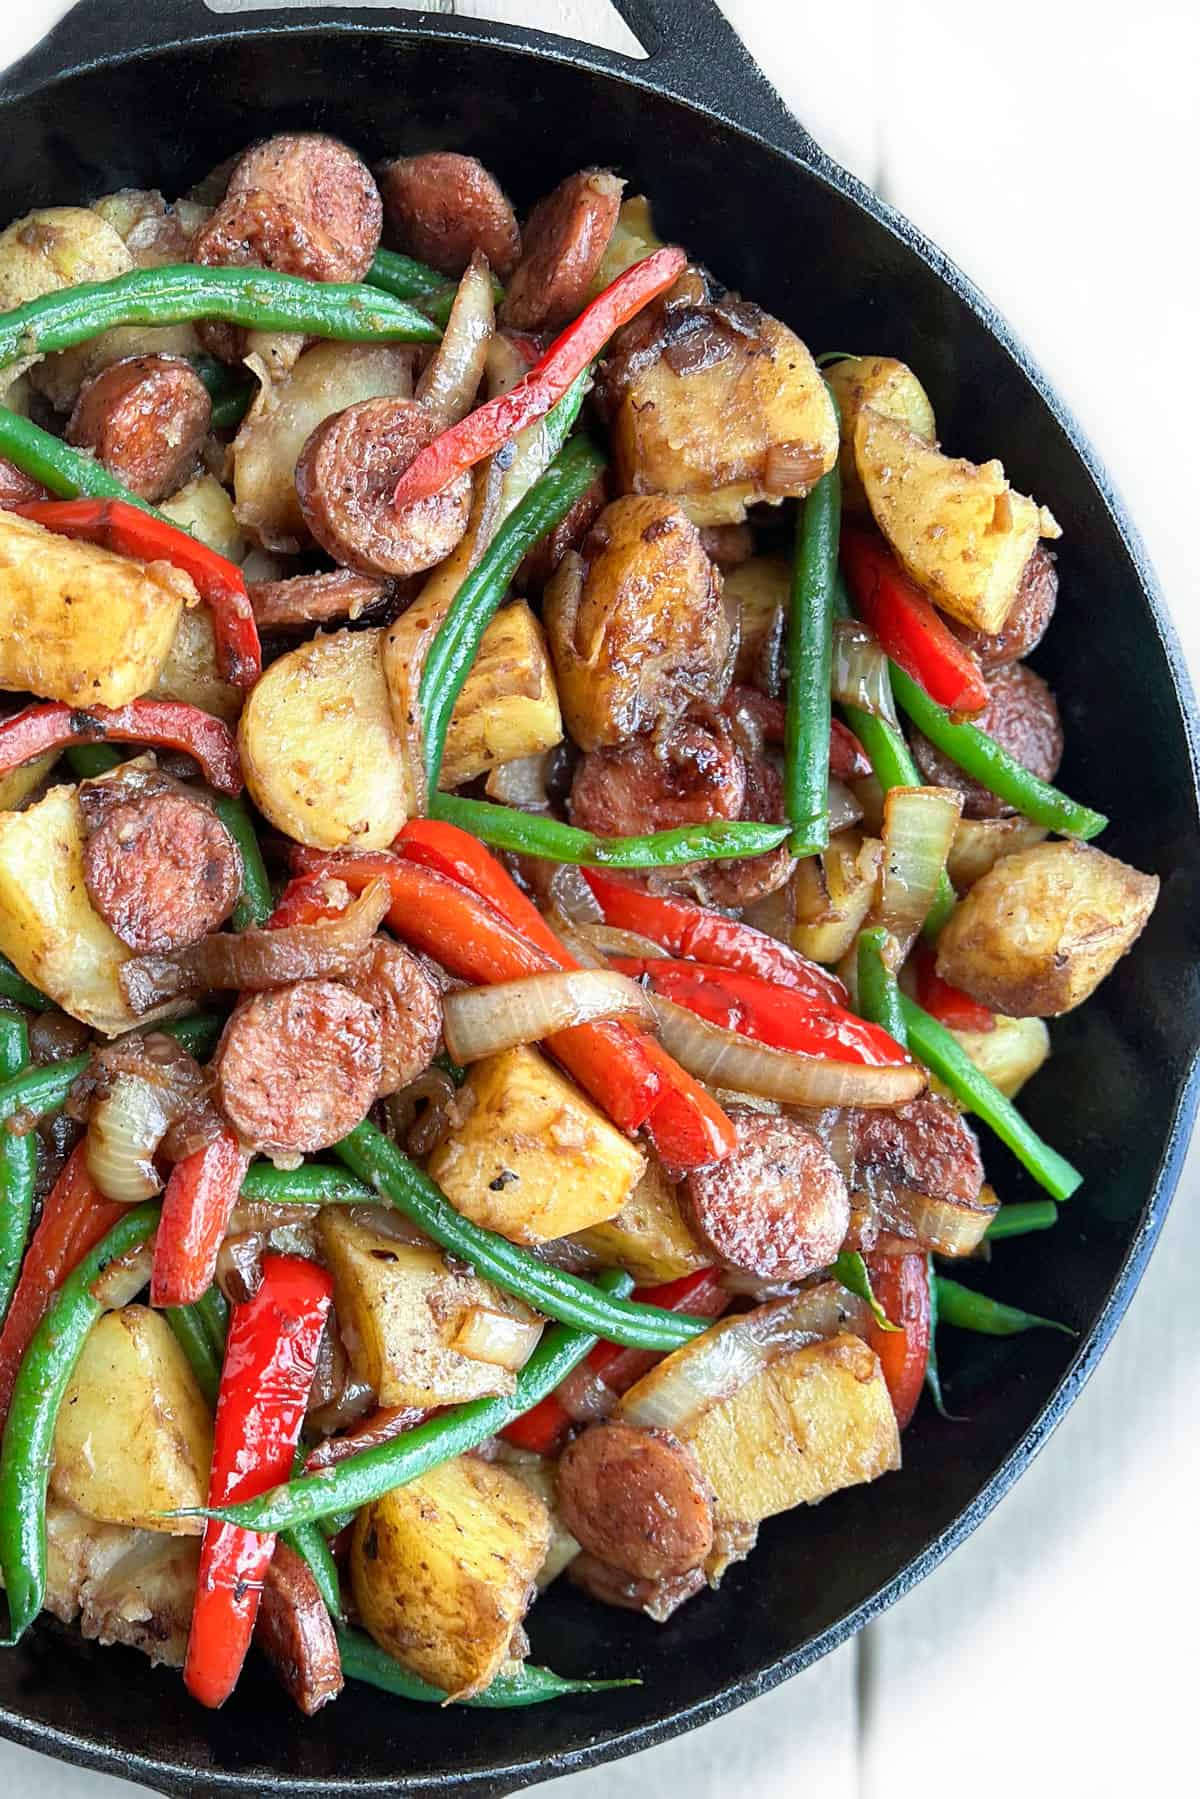 Sausages, Peppers, Onions and Potatoes